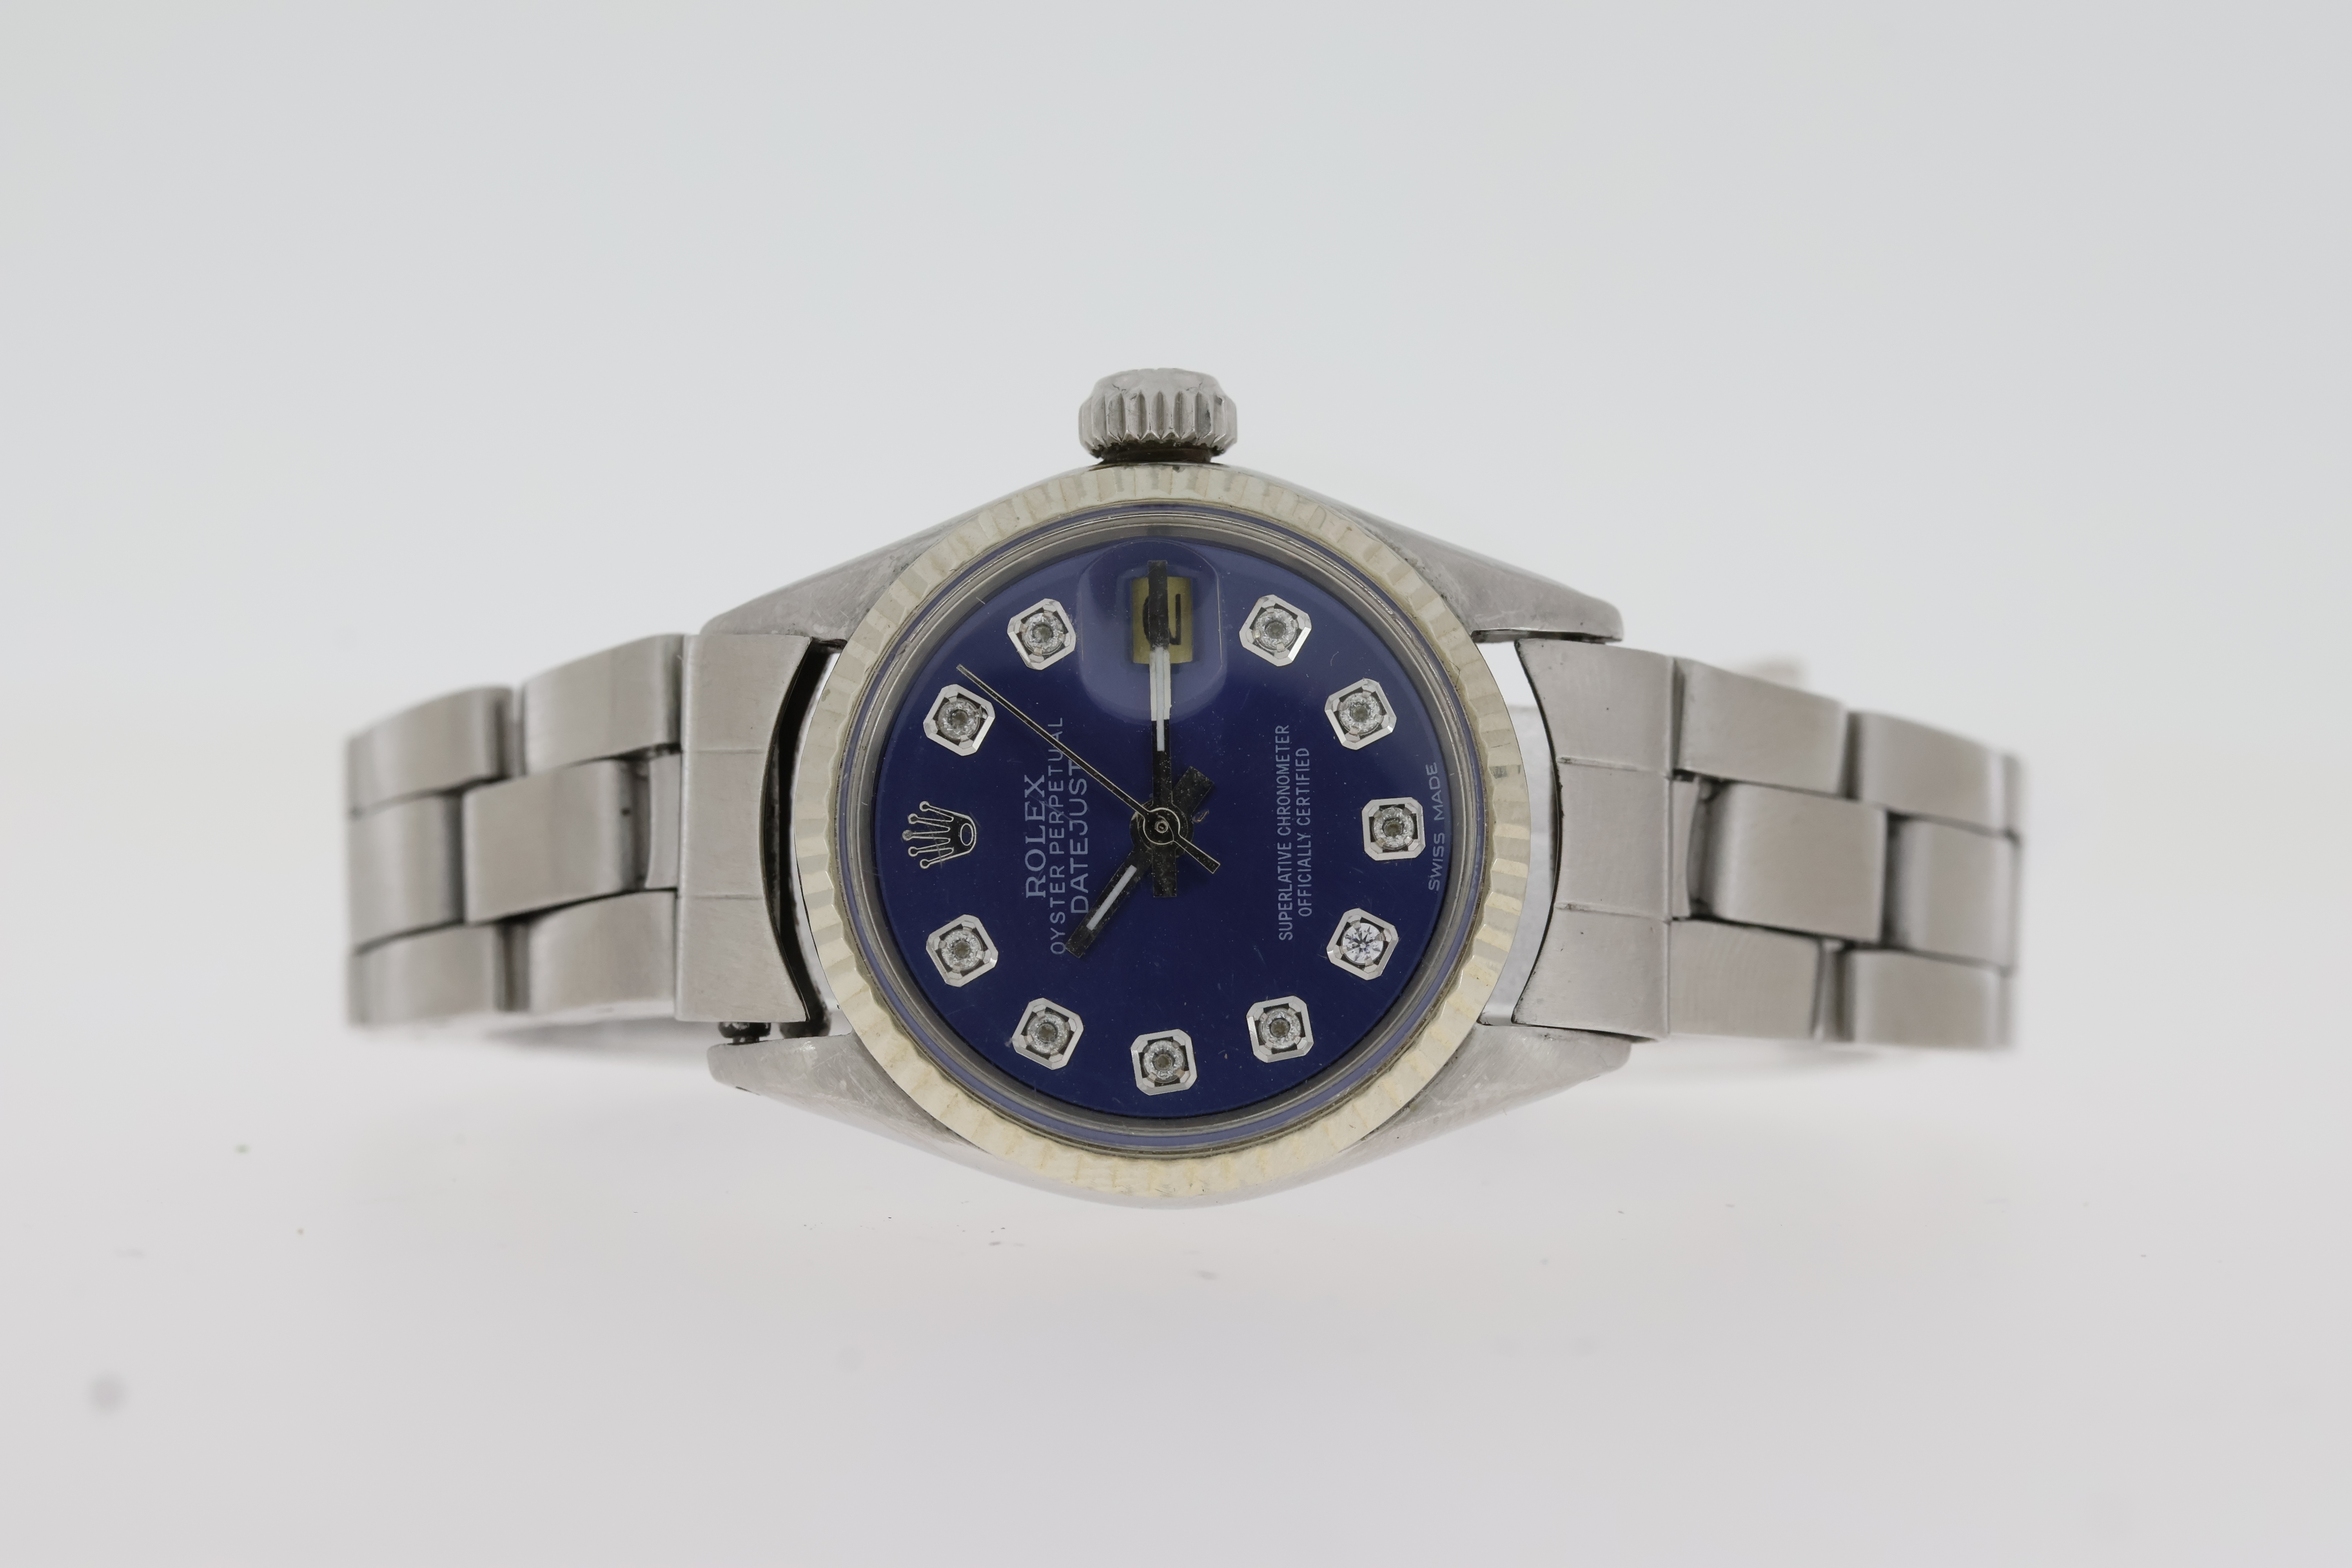 LADIES ROLEX DATEJUST 26 REFERENCE 6517 CIRCA 1969, circular aftermarket blue dial with diamond hour